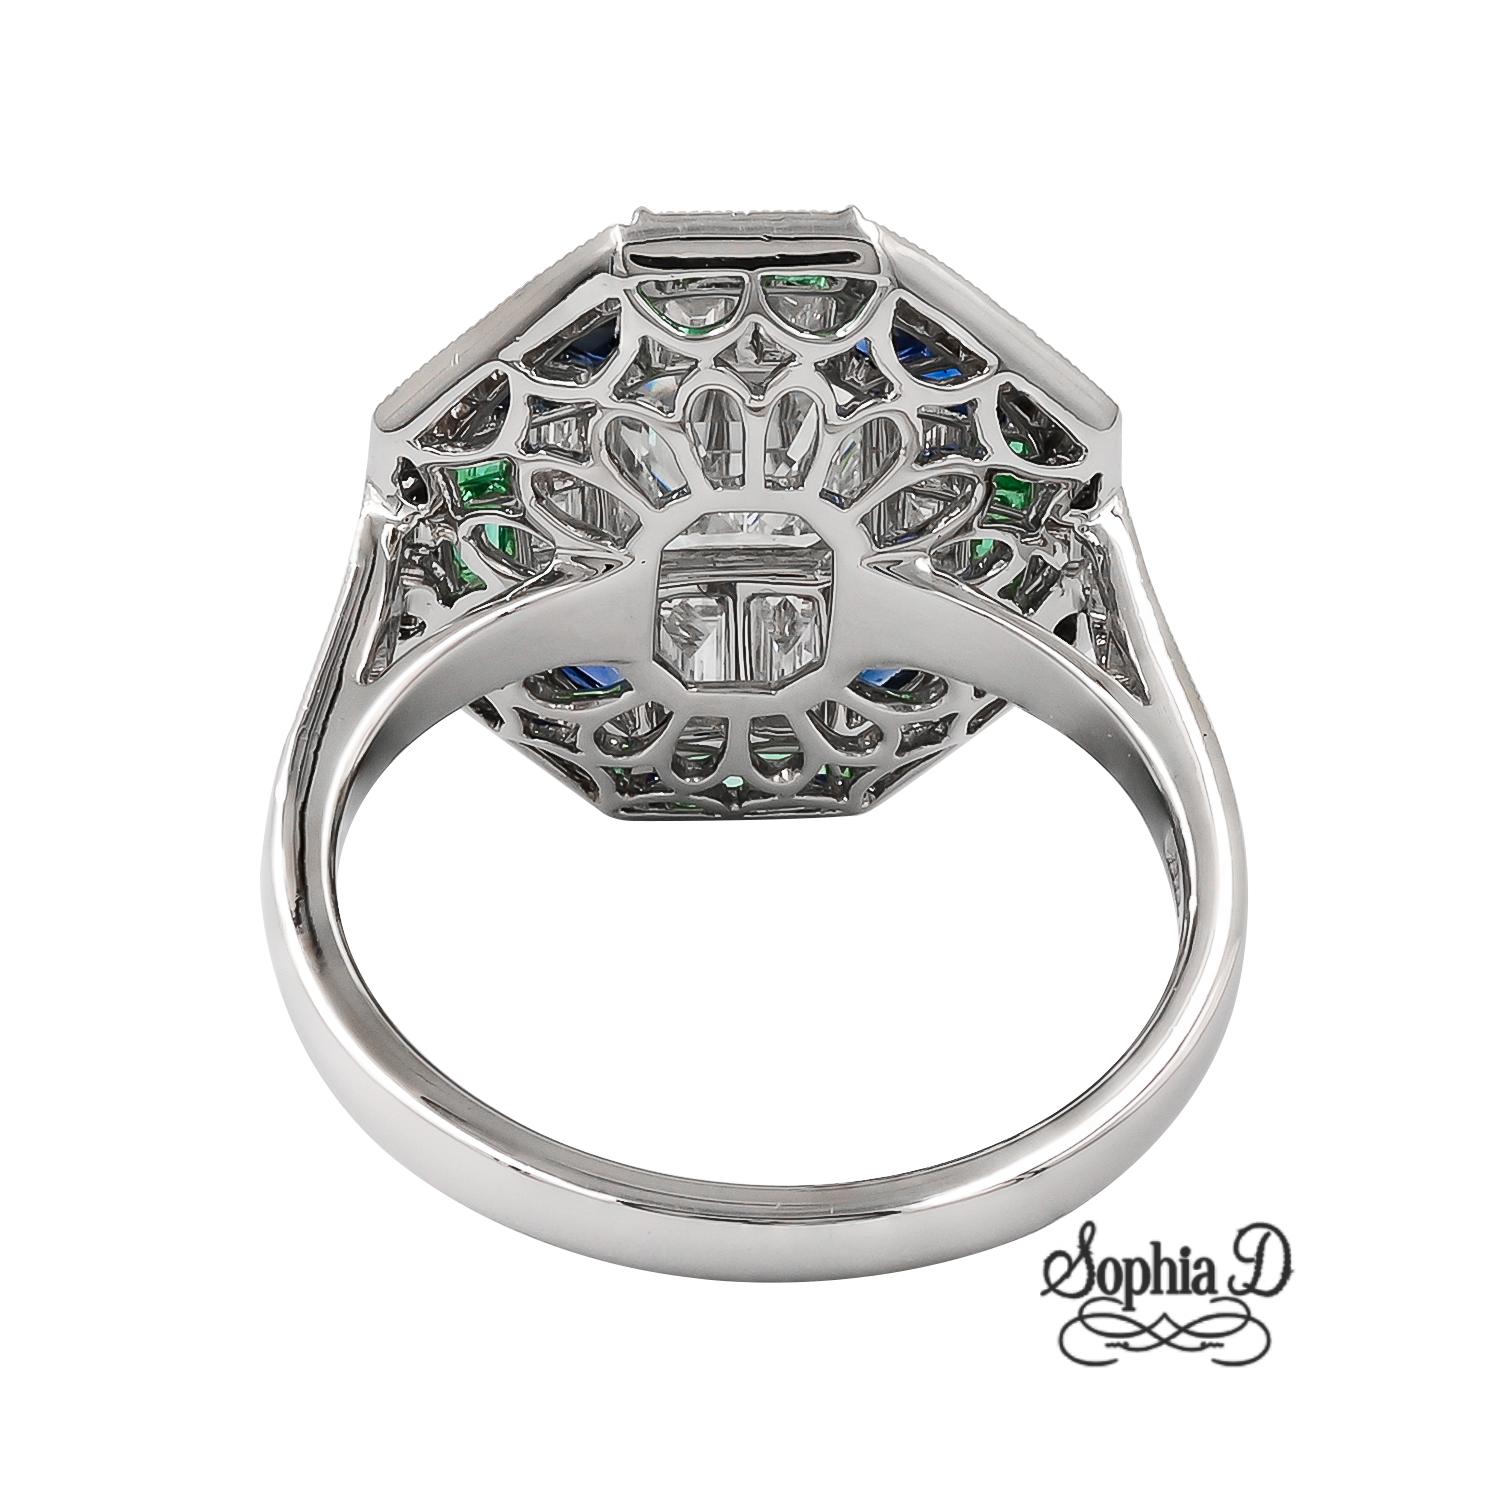 Sophia D. Art Deco Ring in Platinum with Diamonds, Emeralds and Blue Sapphires In New Condition For Sale In New York, NY